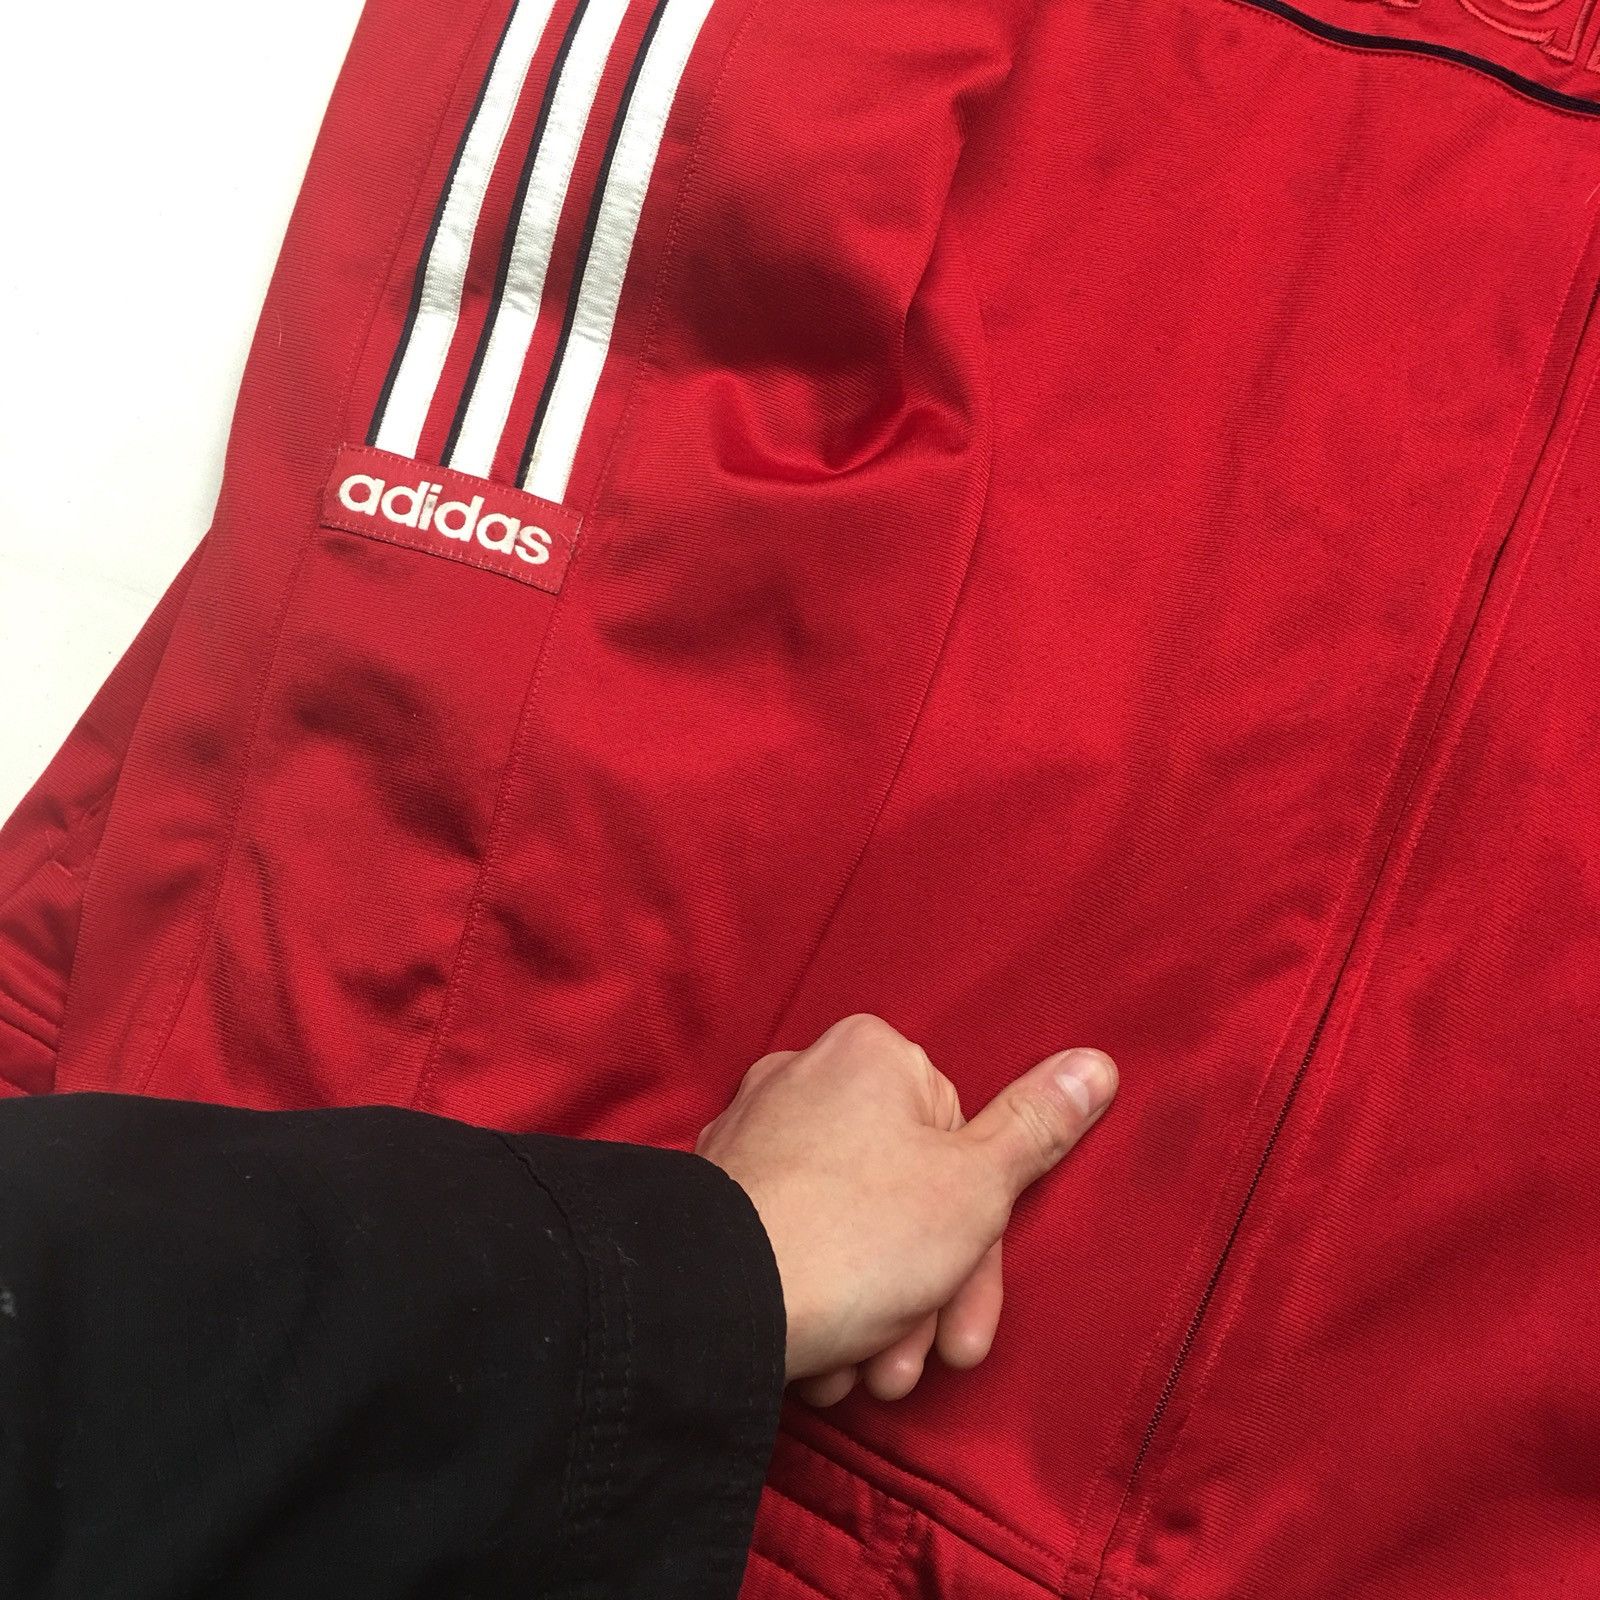 Adidas Early 90s Adidas Jacket Size US XL / EU 56 / 4 - 5 Preview